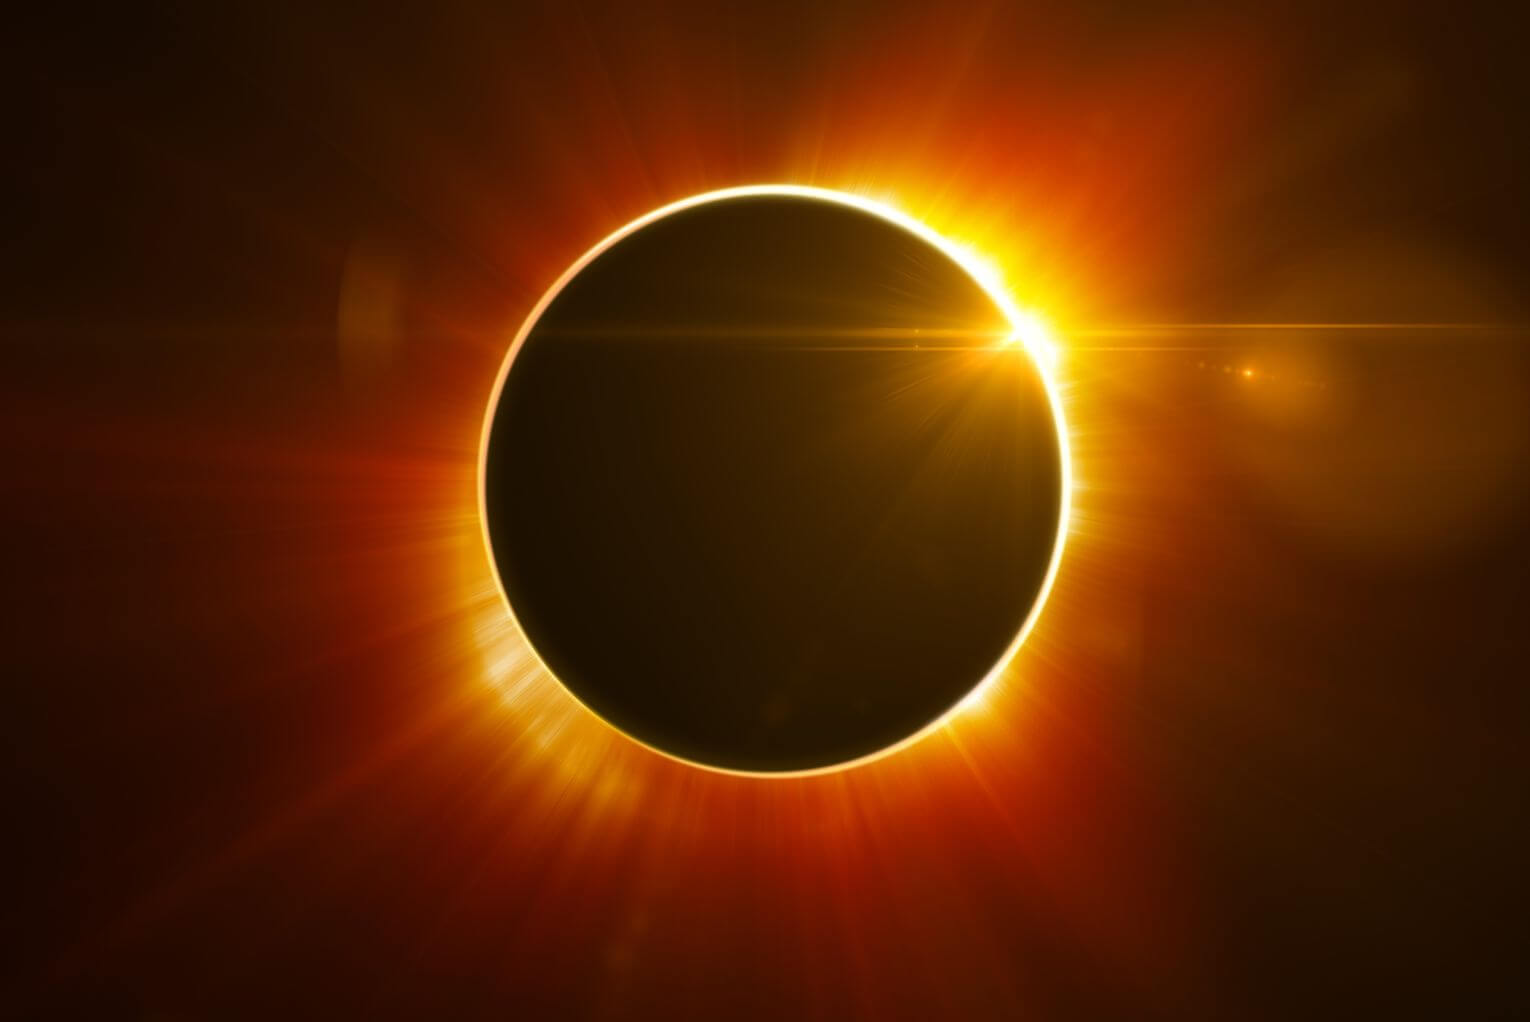 Could the Eclipse Be a Sign of the Coming Tribulation?